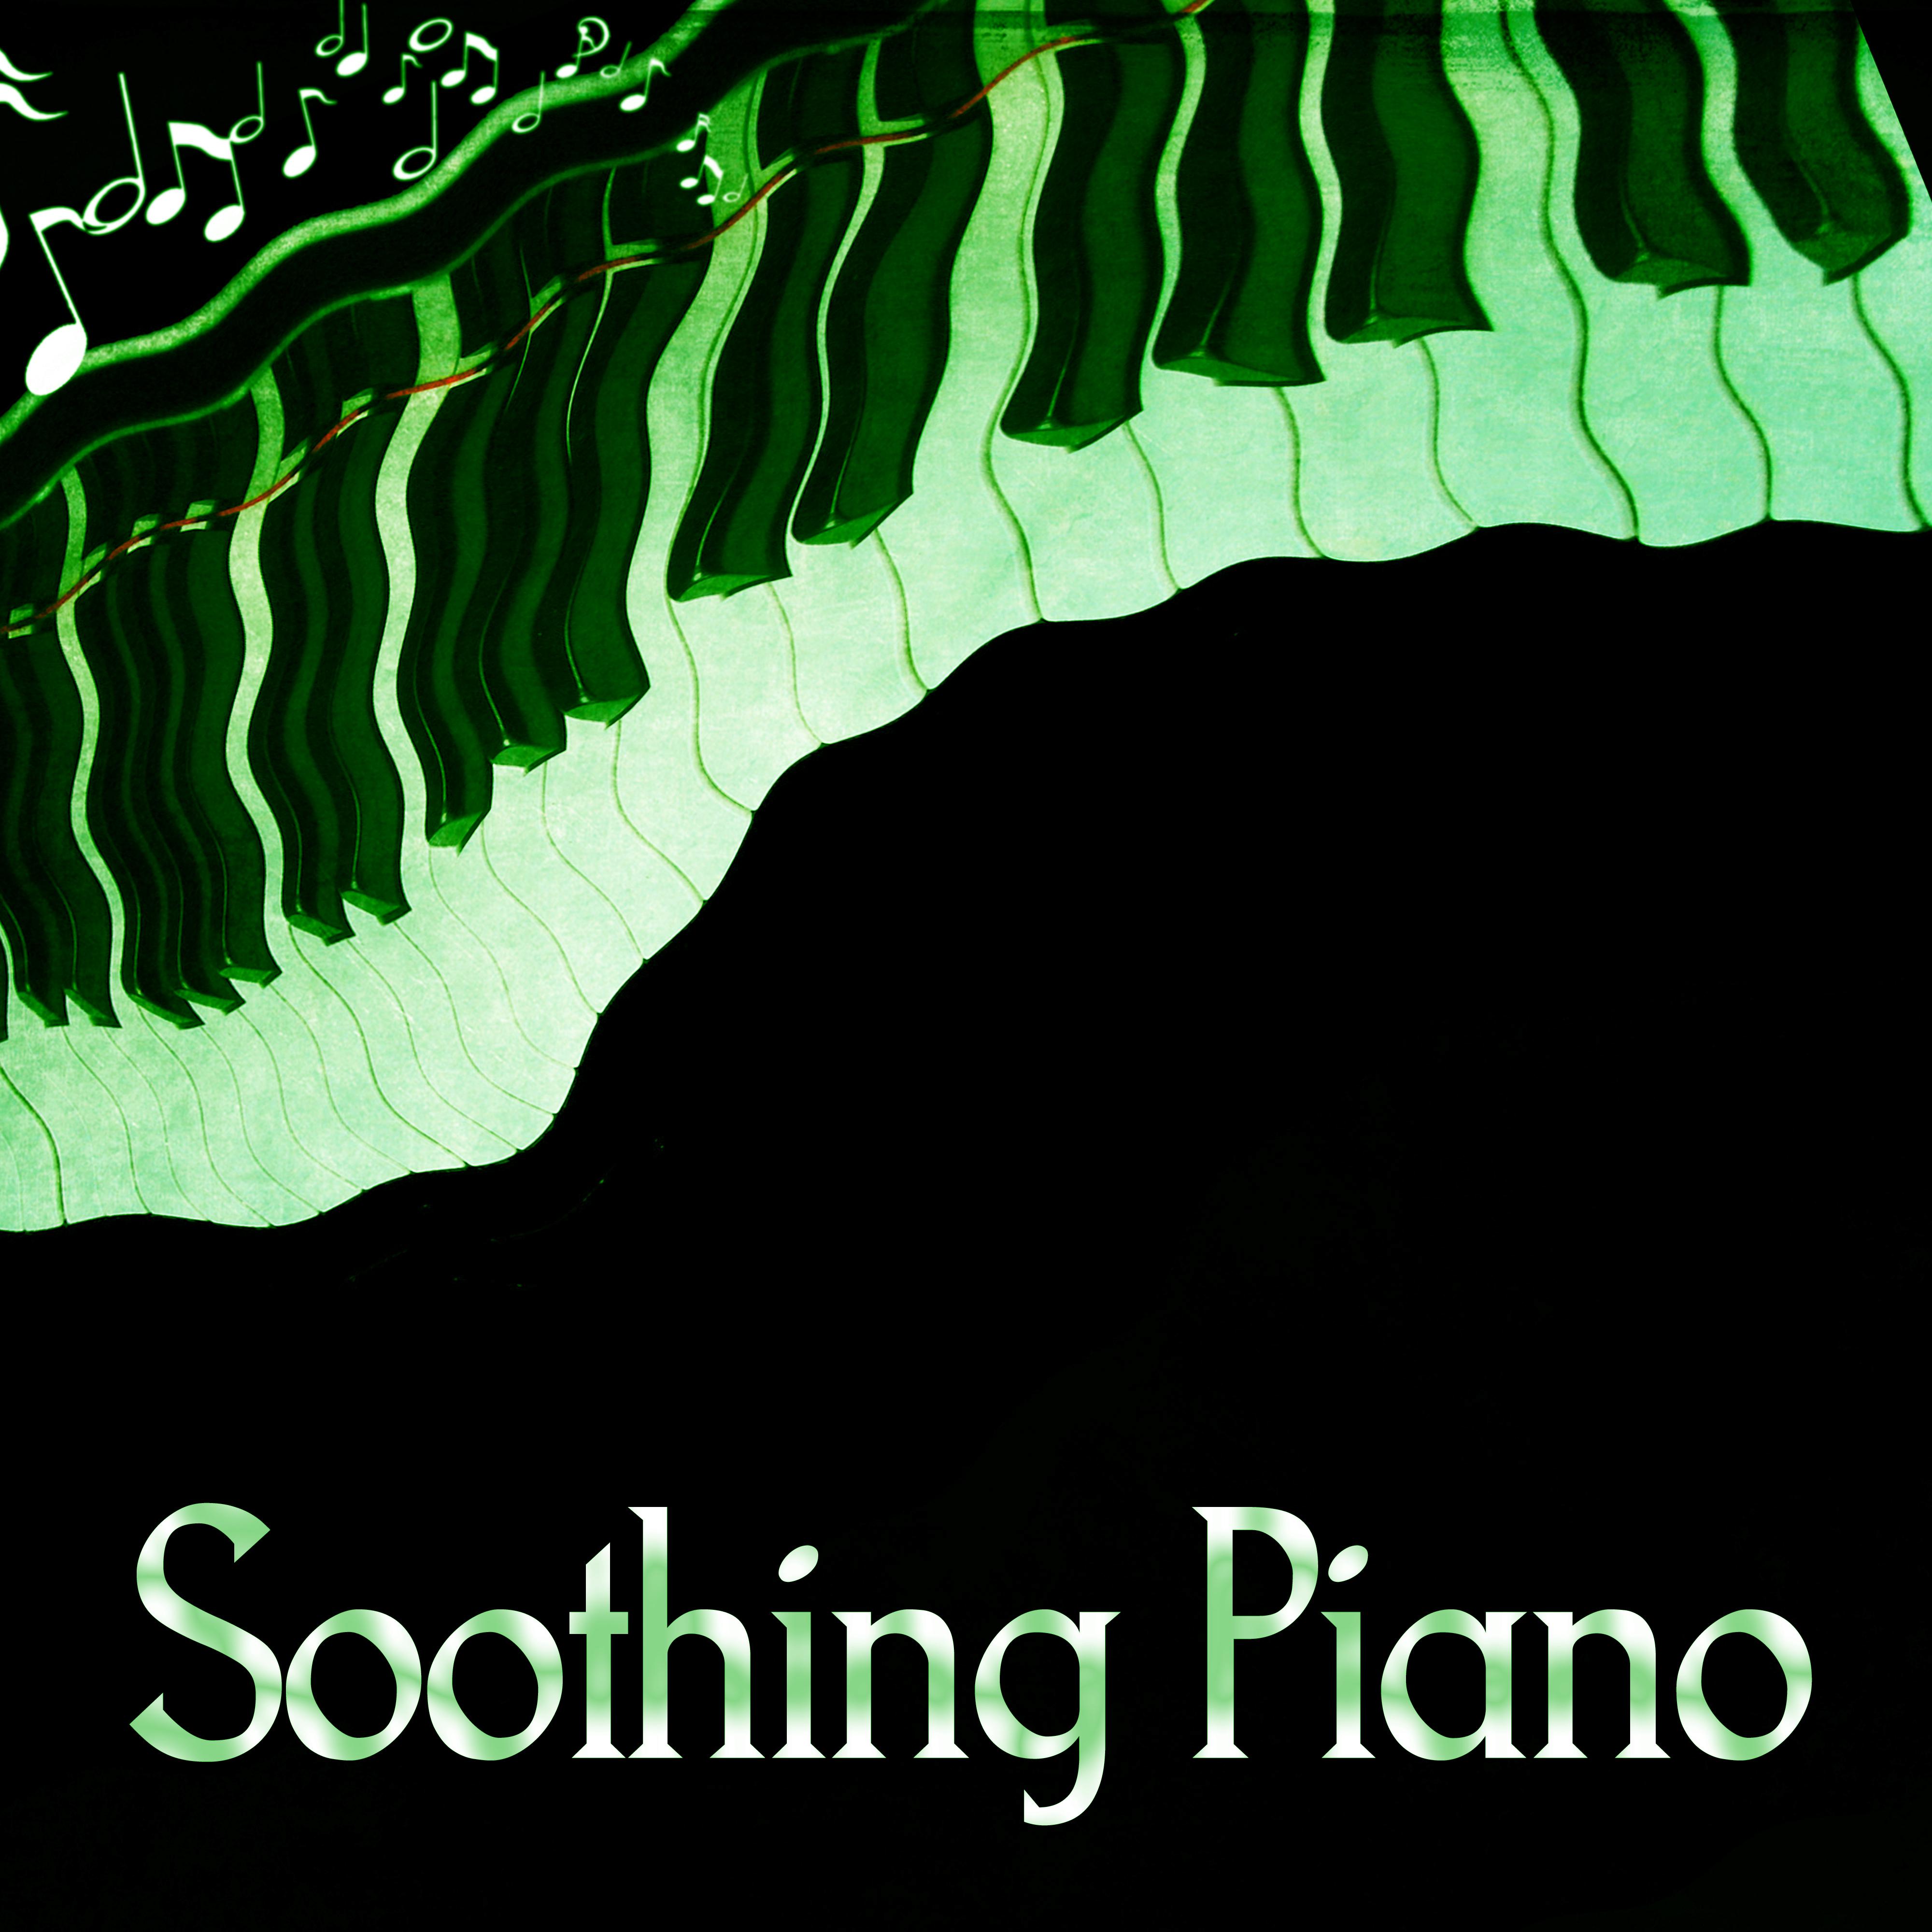 Soothing Piano  Easy Listening, Quiet Jazz Piano, Piano Bar, Calming Sounds for Relaxation, Background Sounds